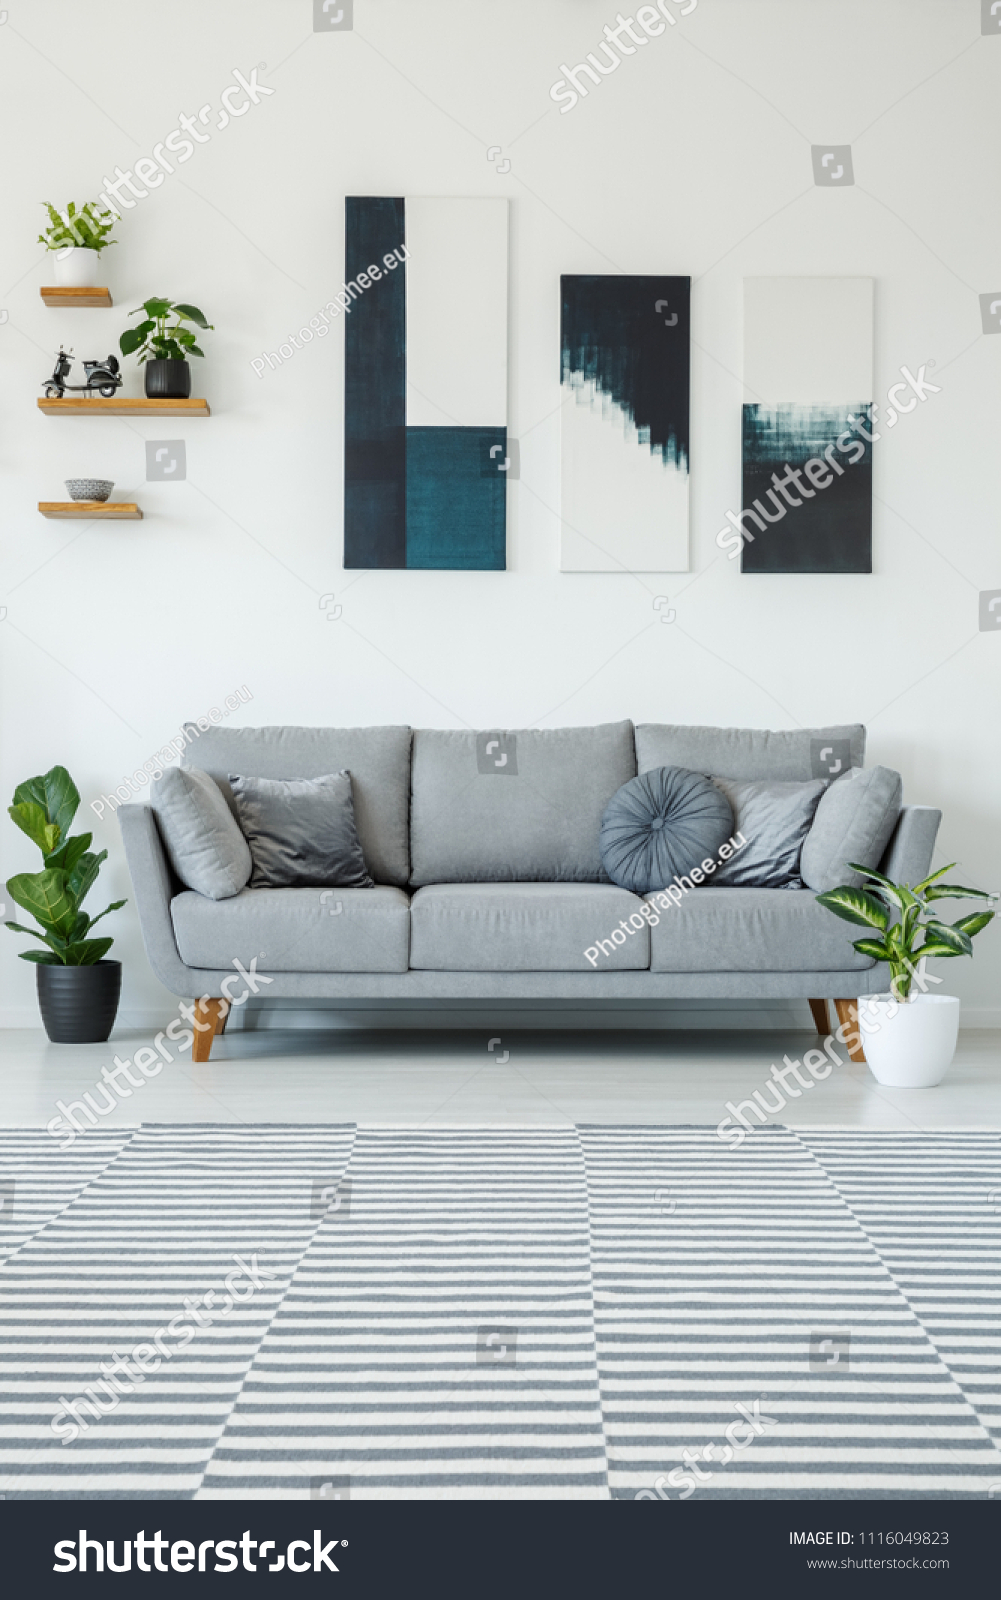 Posters above grey settee in bright living room interior with plants and patterned carpet. Real photo #1116049823